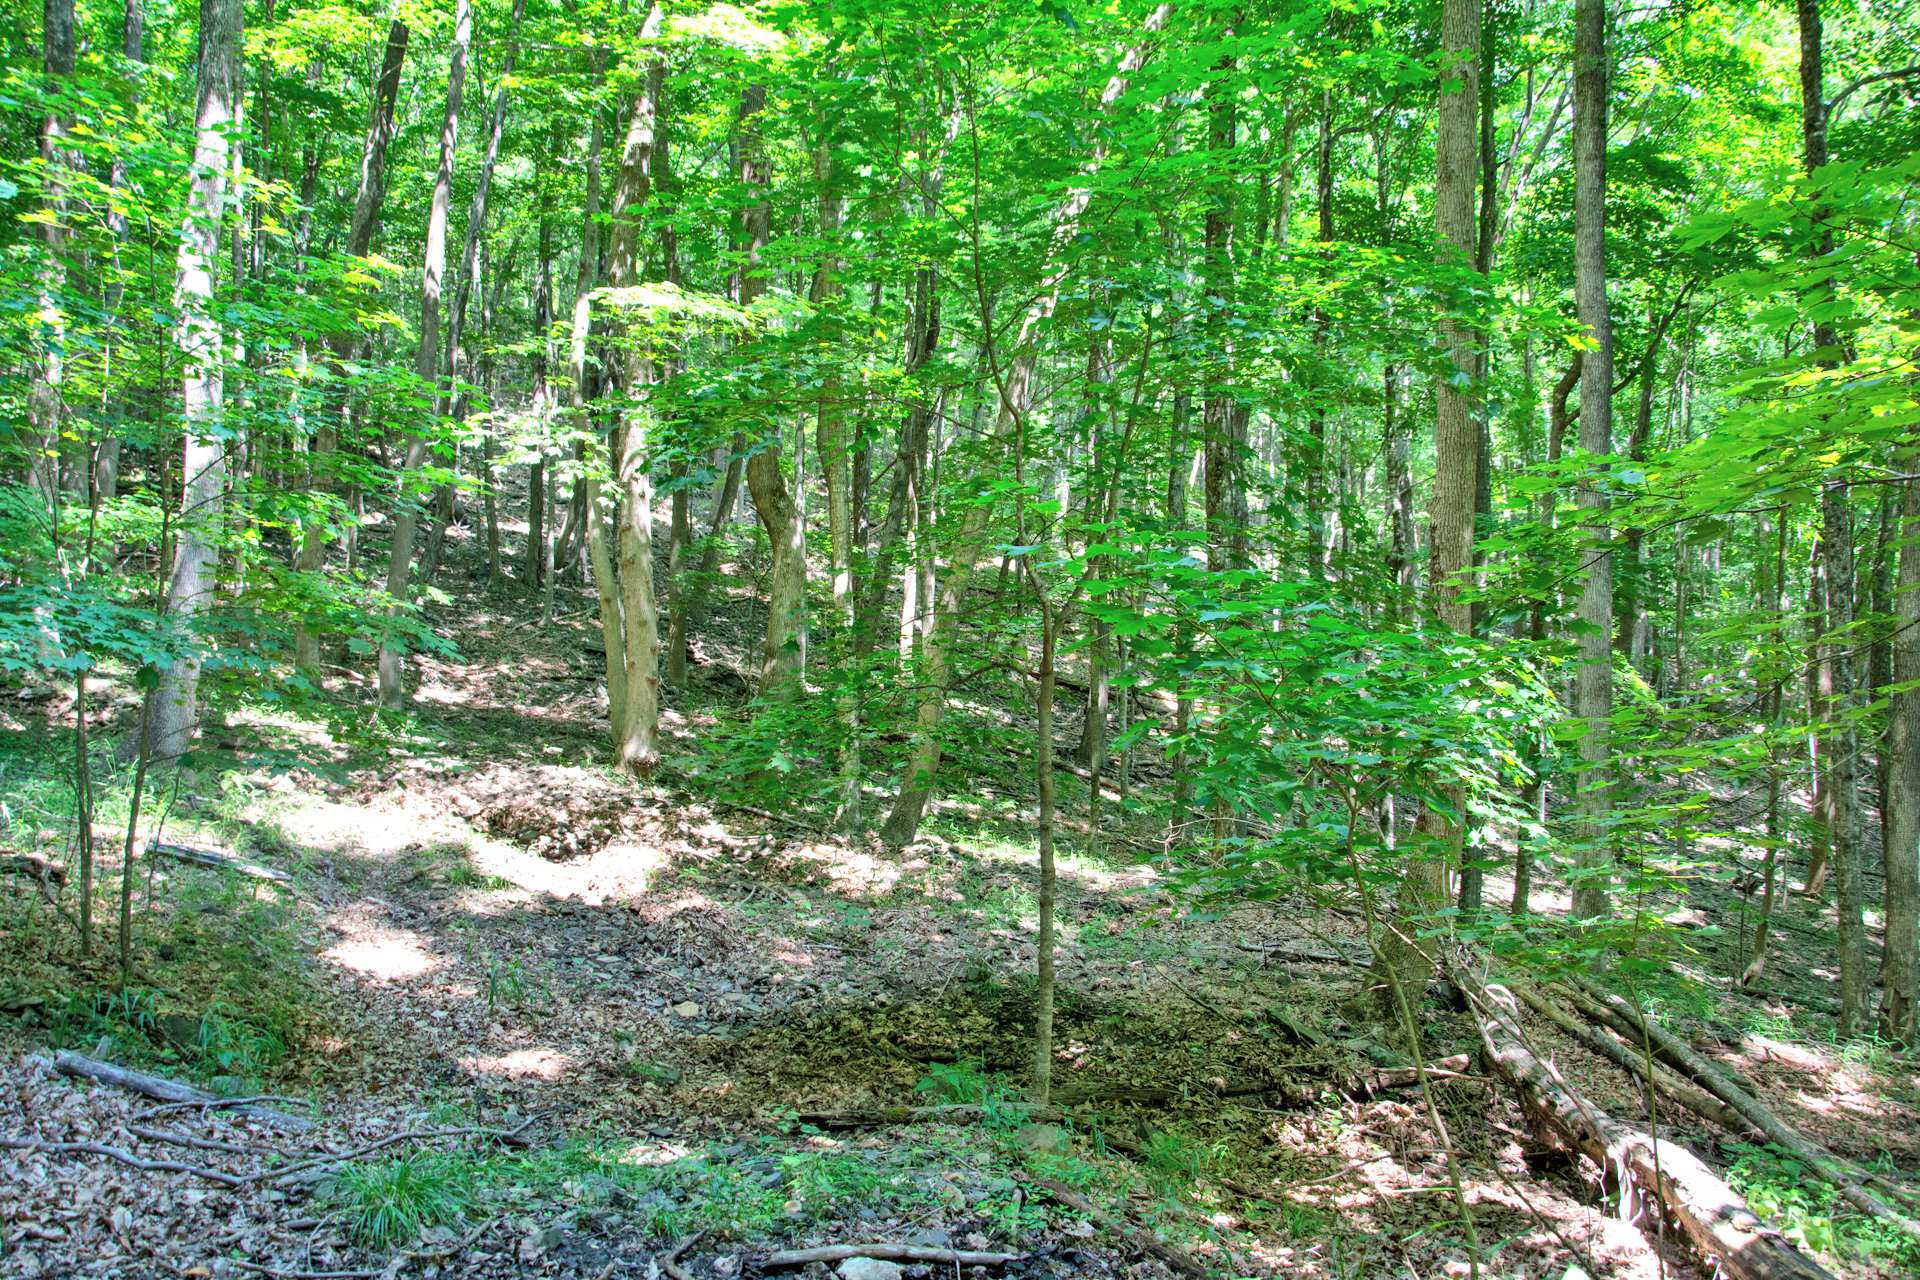 Lot 39, a 1.85 acre mountain home site also has shared well rights and a diverse mixture of hardwoods and mountain foliage.  This lot is offered at $45,000.